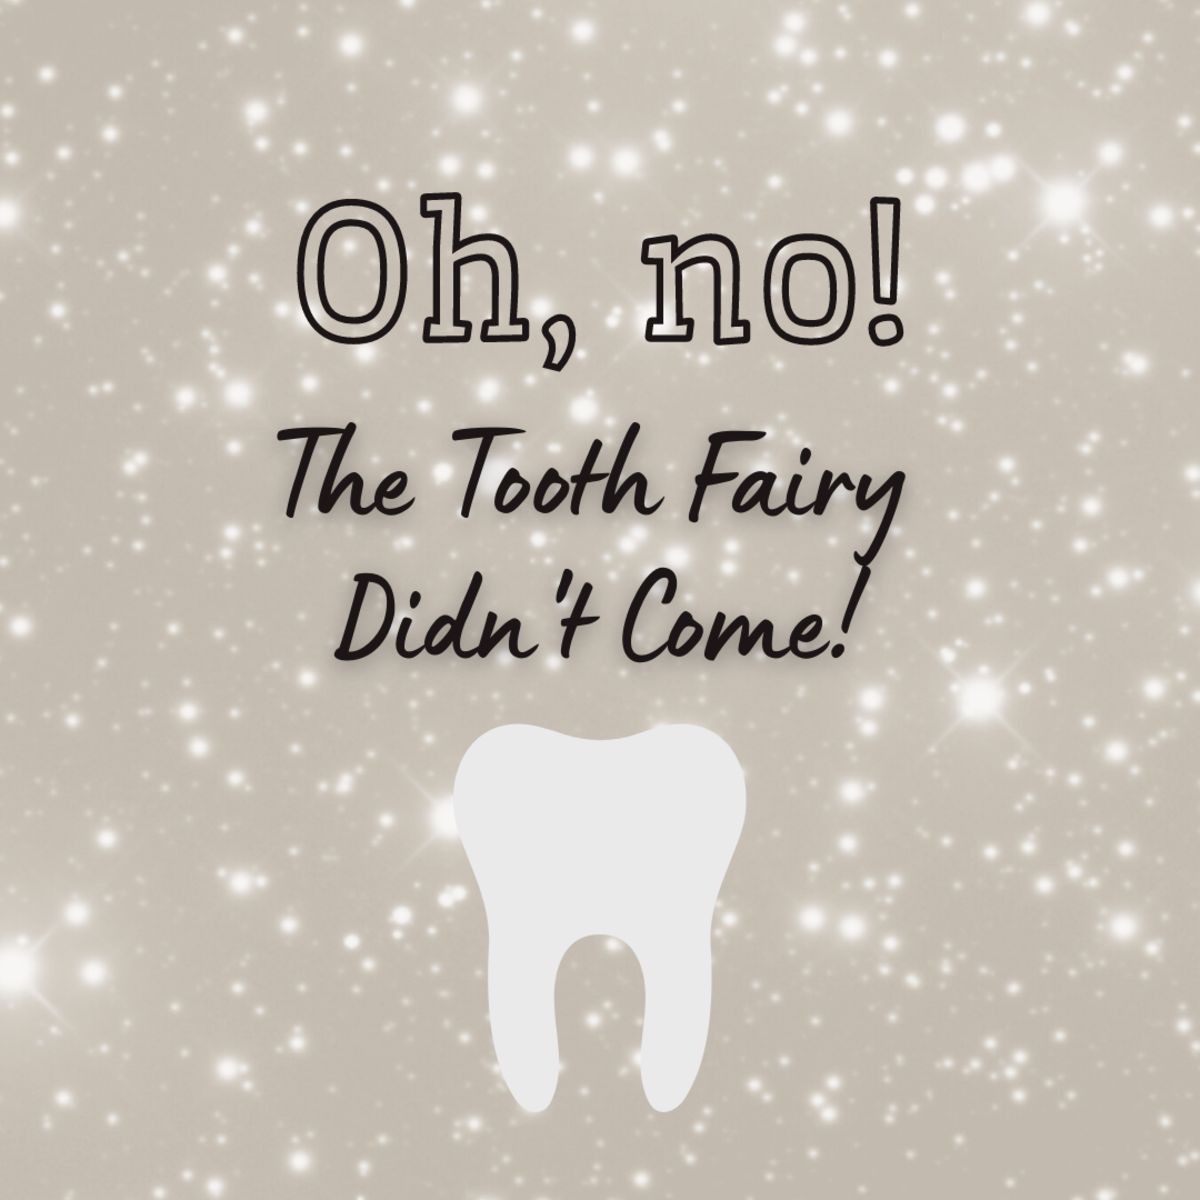 What to Do When the Tooth Fairy Forgets to Visit